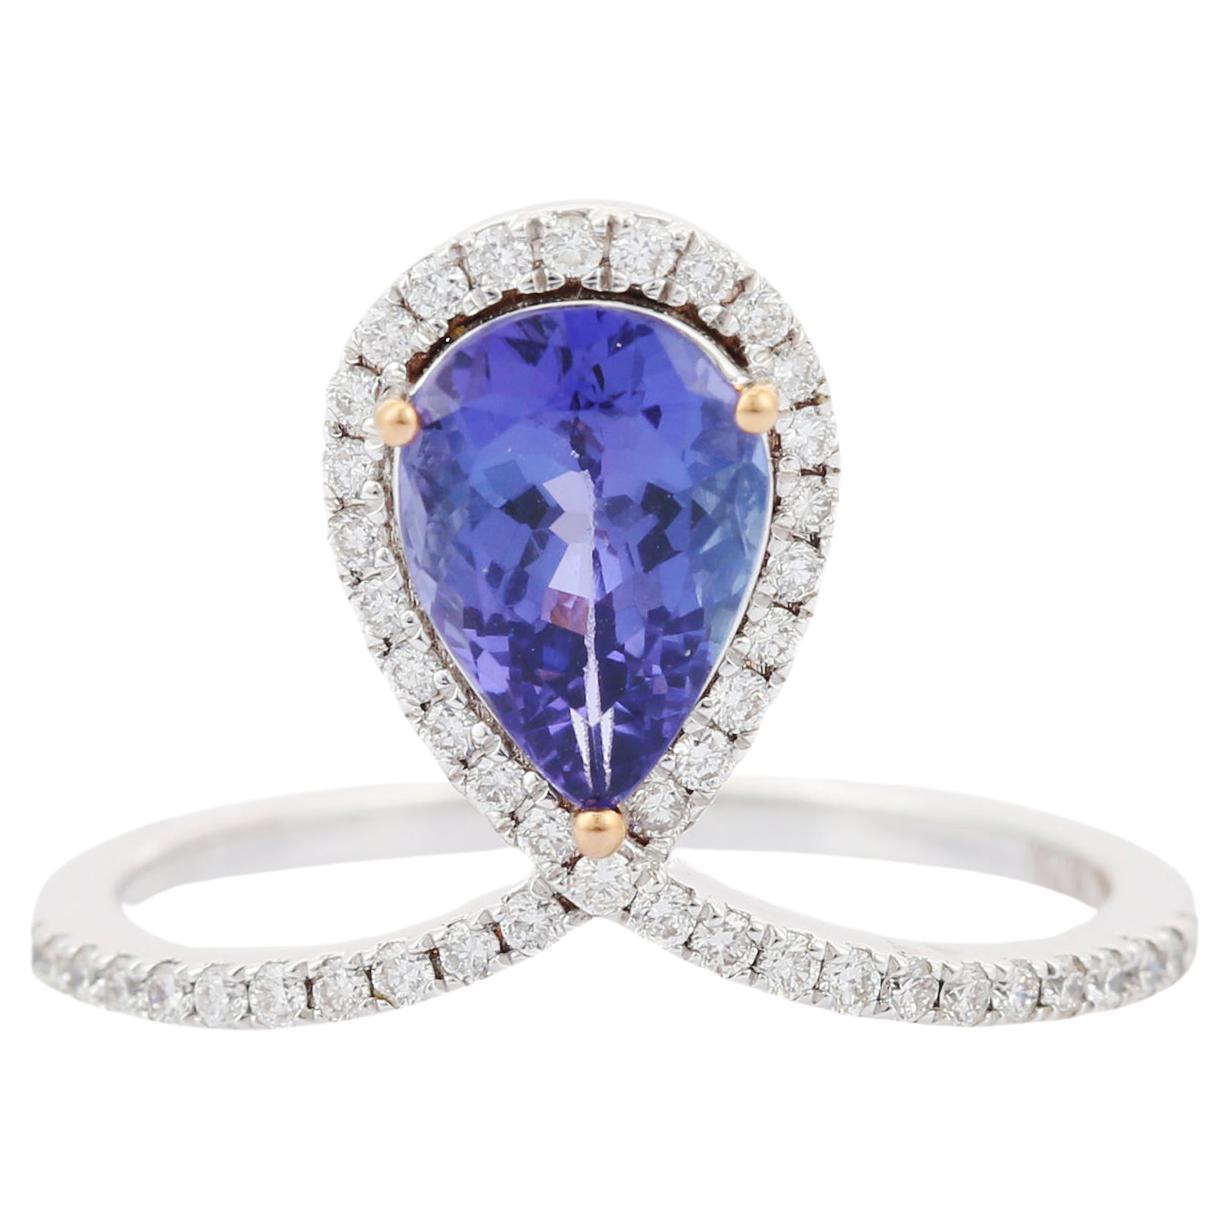 For Sale:  18K Tanzanite and Diamond Ring in White Gold Pear Shape 1.19 Carat  2